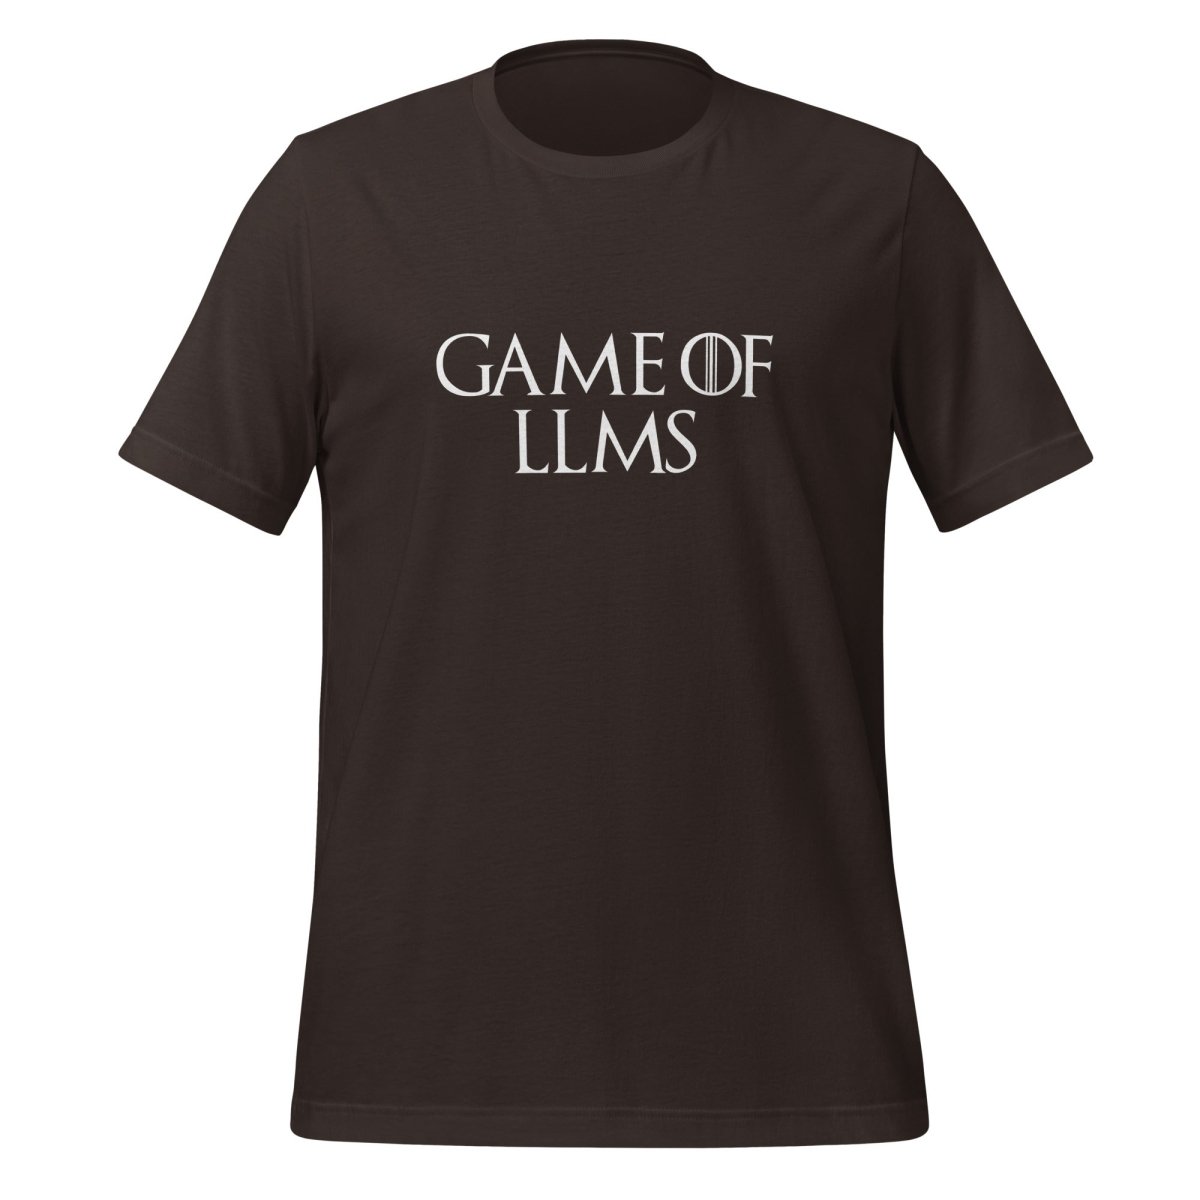 Game of LLMs T - Shirt (unisex) - Brown - AI Store